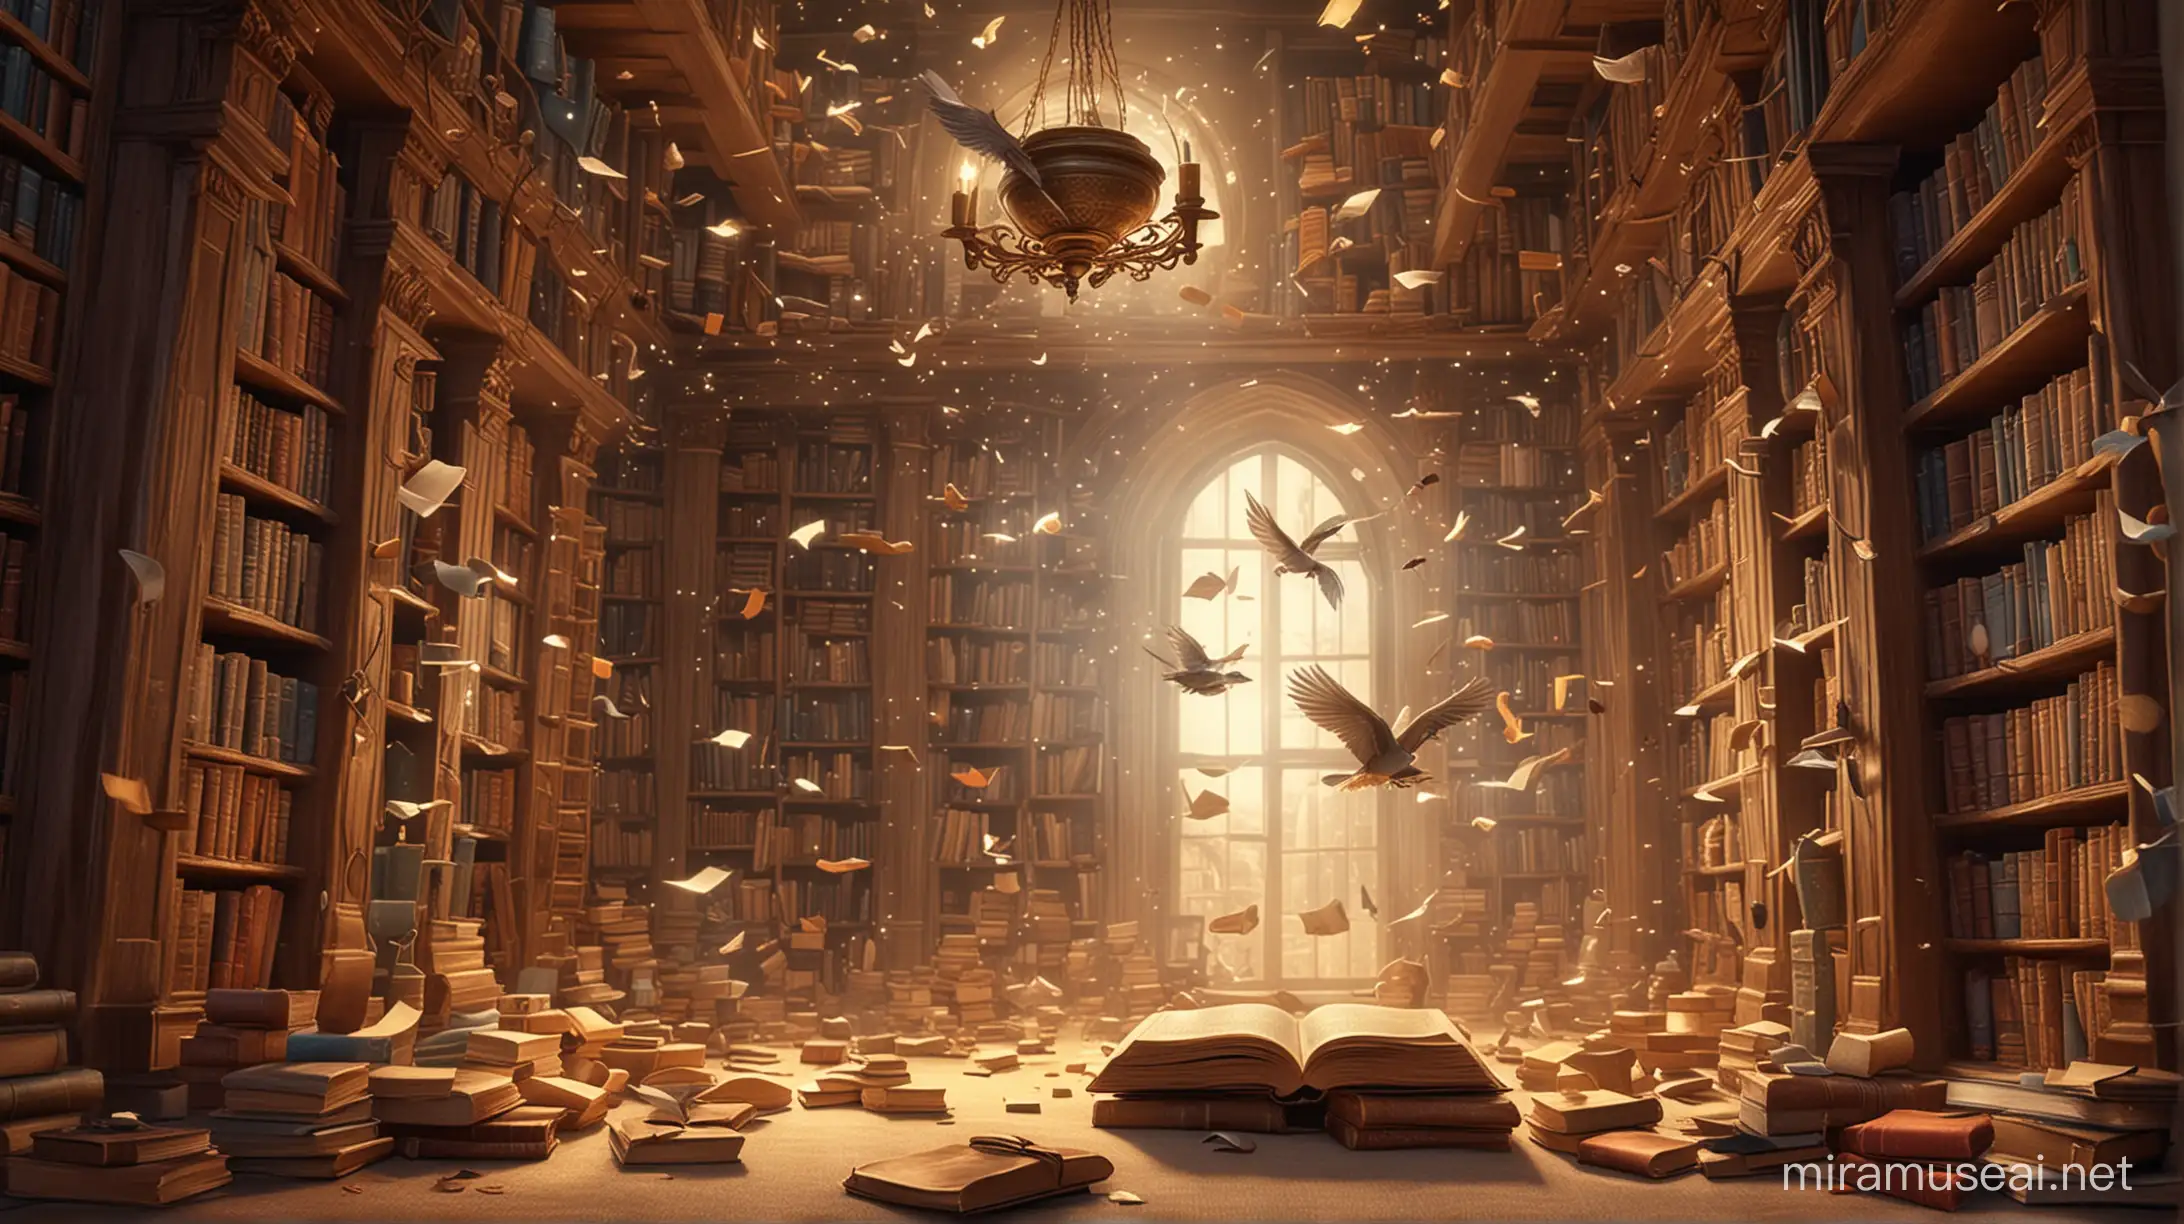 Enchanted Library Flying Books and Tales Come Alive in Magical Realism